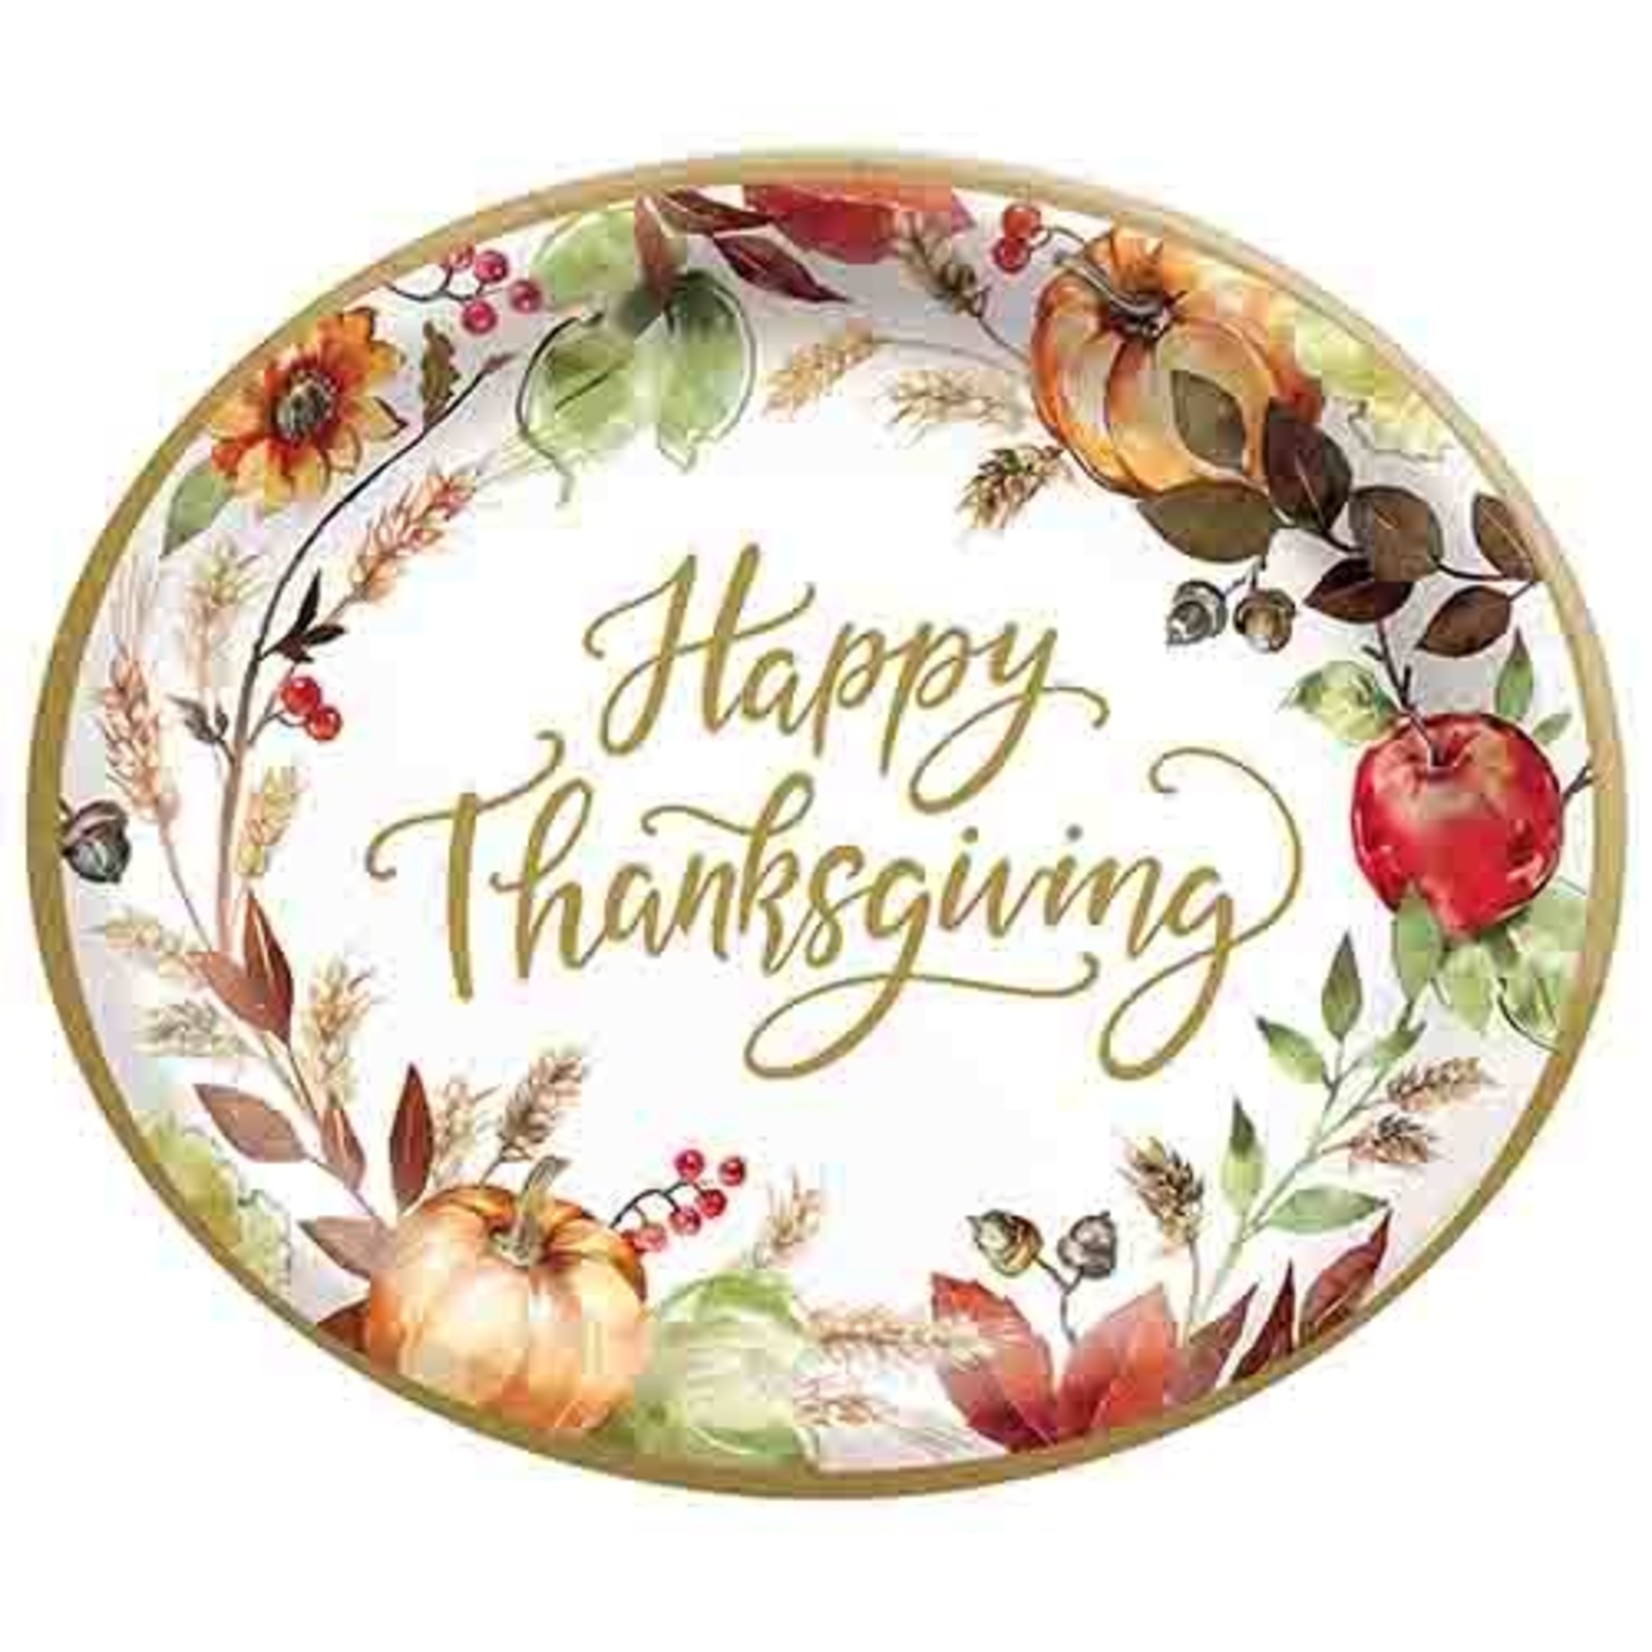 Amscan 12" x 10" Grateful Day Oval Plates - 18ct.